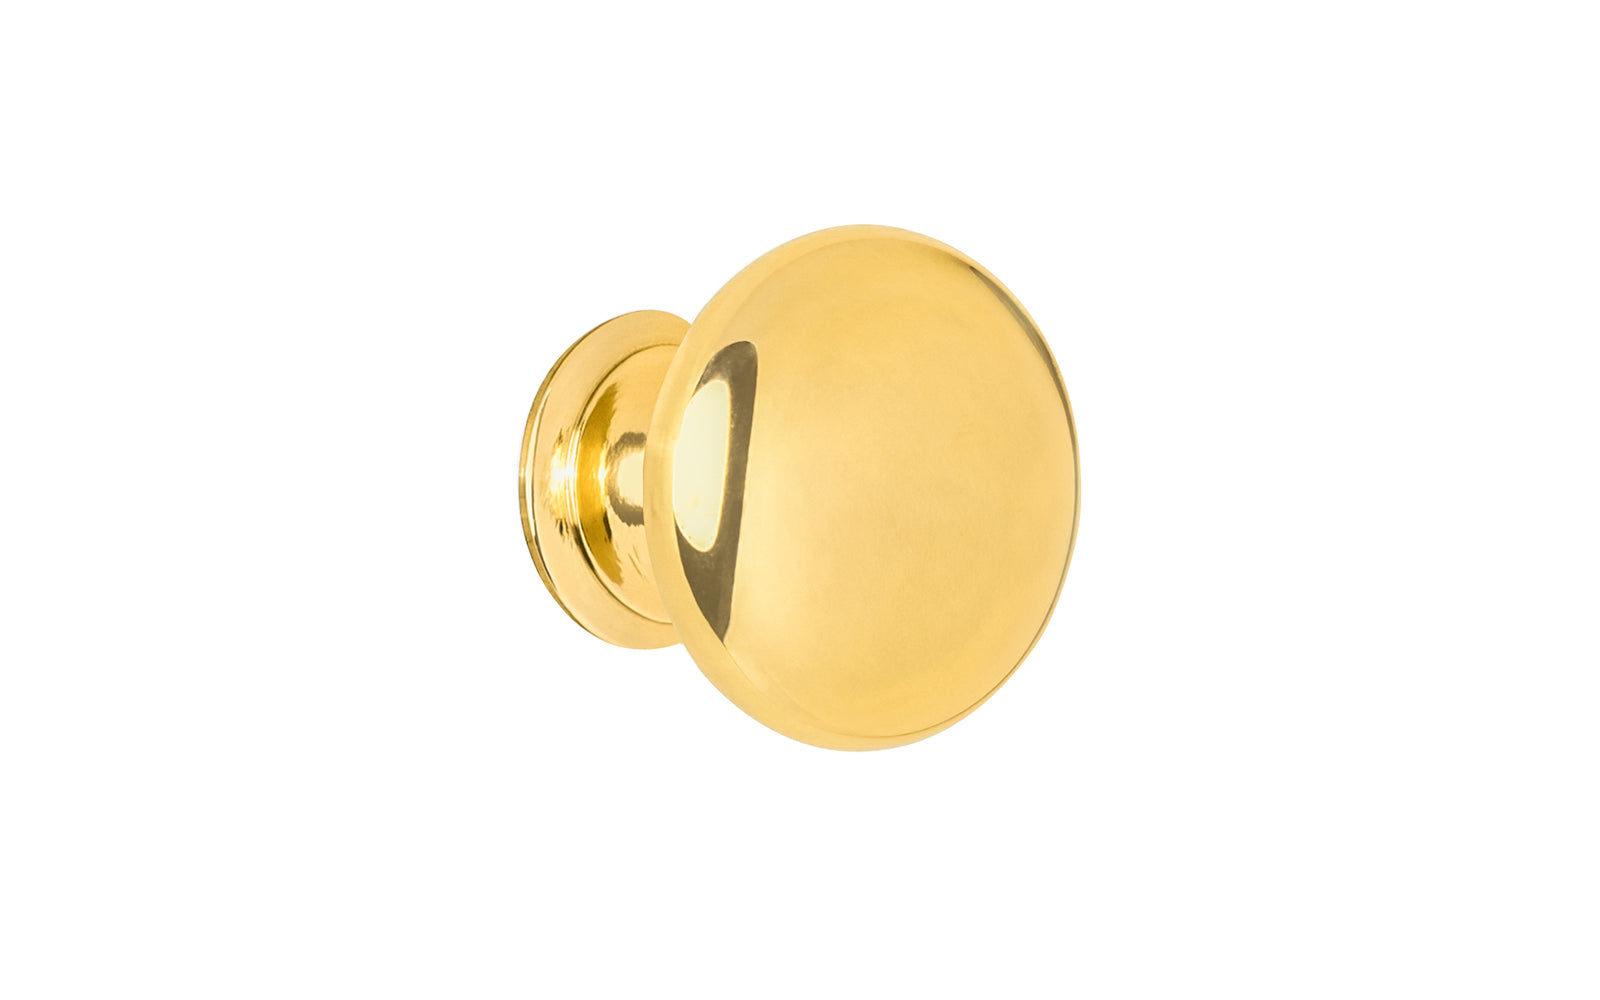 Vintage-style Hardware · Traditional & Classic Unlacquered Brass Knob. 1" diameter size knob. This stylish round cabinet knob has a smooth look & feel on a pedestal shaped base. Great for kitchens, bathrooms, furniture, cabinets, drawers. Non-lacquered brass (un-lacquered brass will patina). Authentic reproduction hardware.